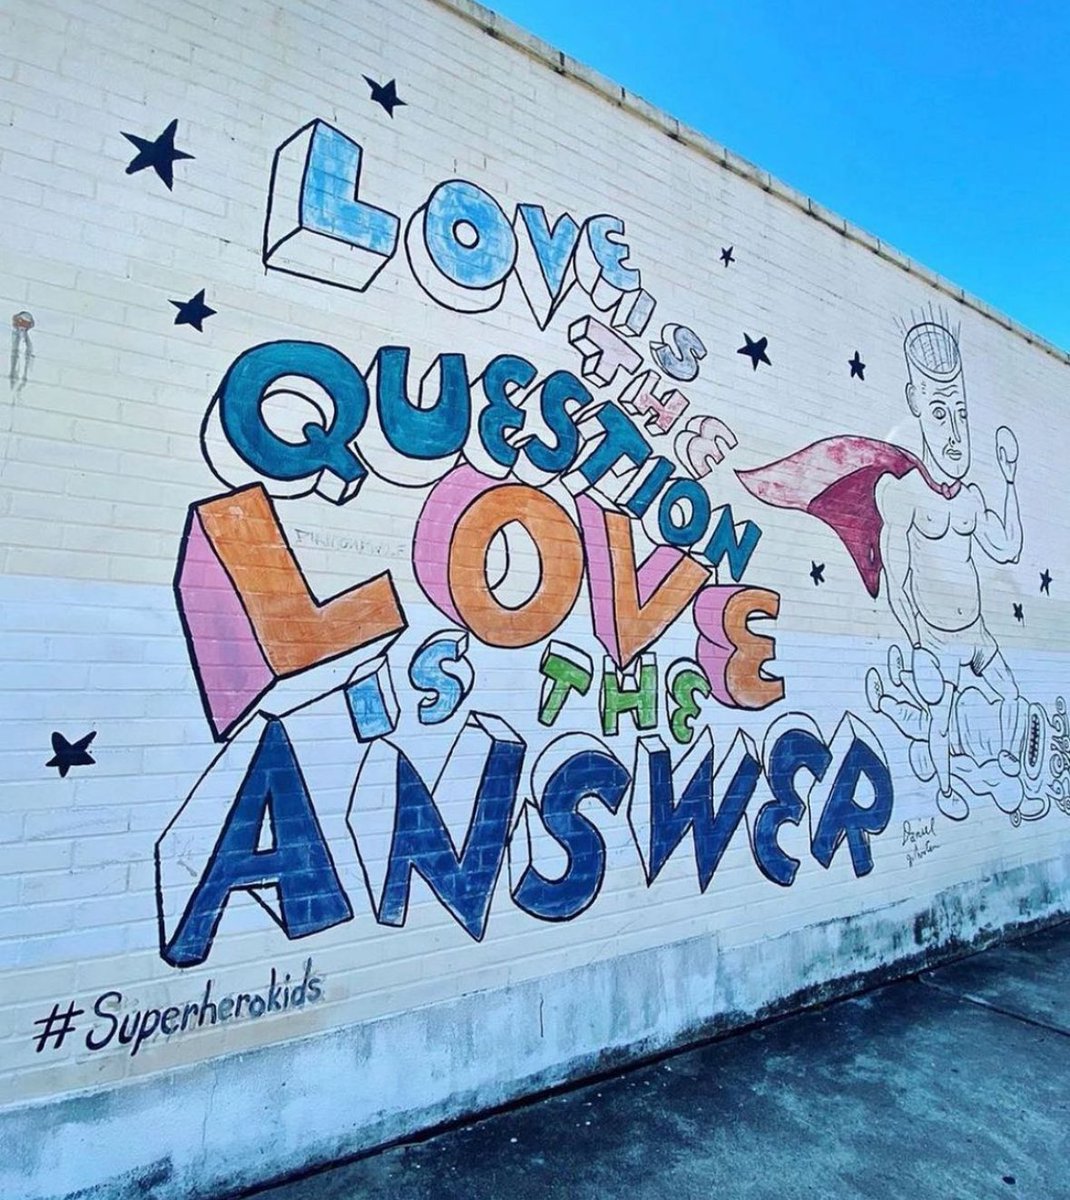 As Daniel taught us: love is the question and love is the answer. 💚 Let’s keep on giving, loving, listening, and checking in with loved ones after the clock strikes 12. There’s enough love to go around all year long. #showtruelove #hihowareyou #danieljohnston